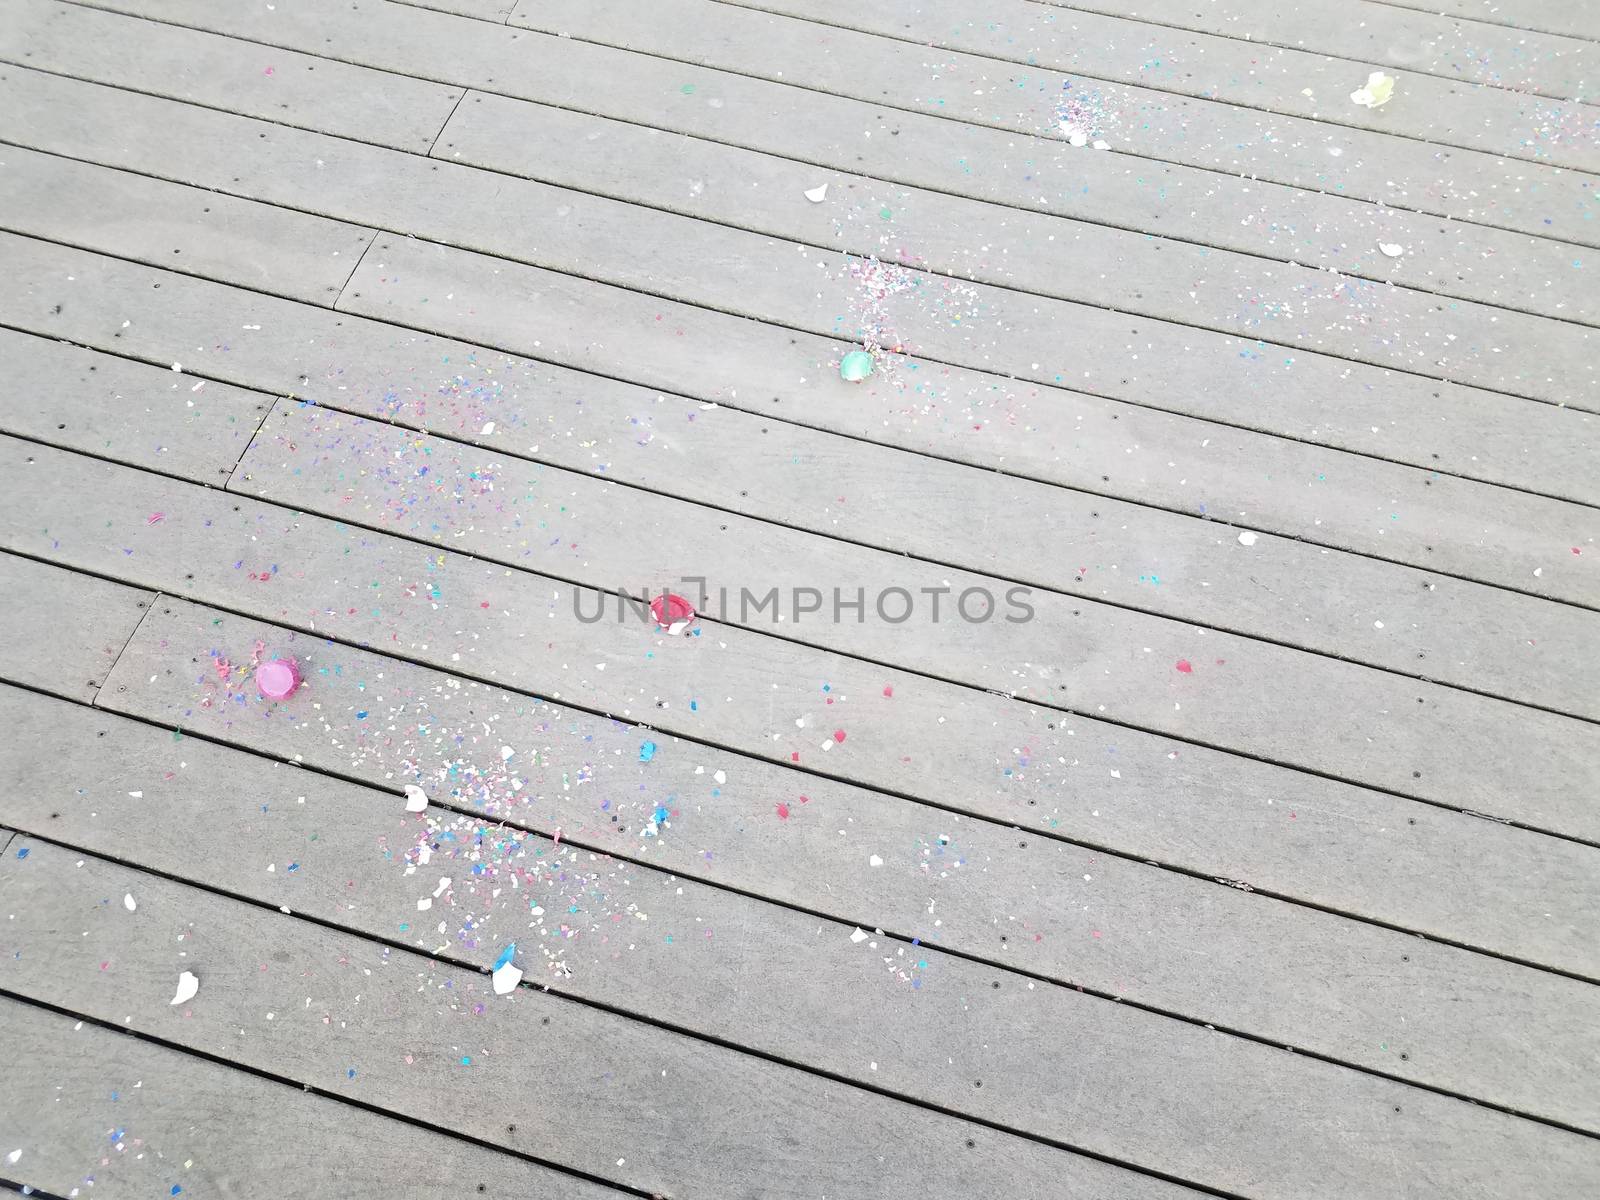 colorful cracked egg shells and paper confetti on wood deck